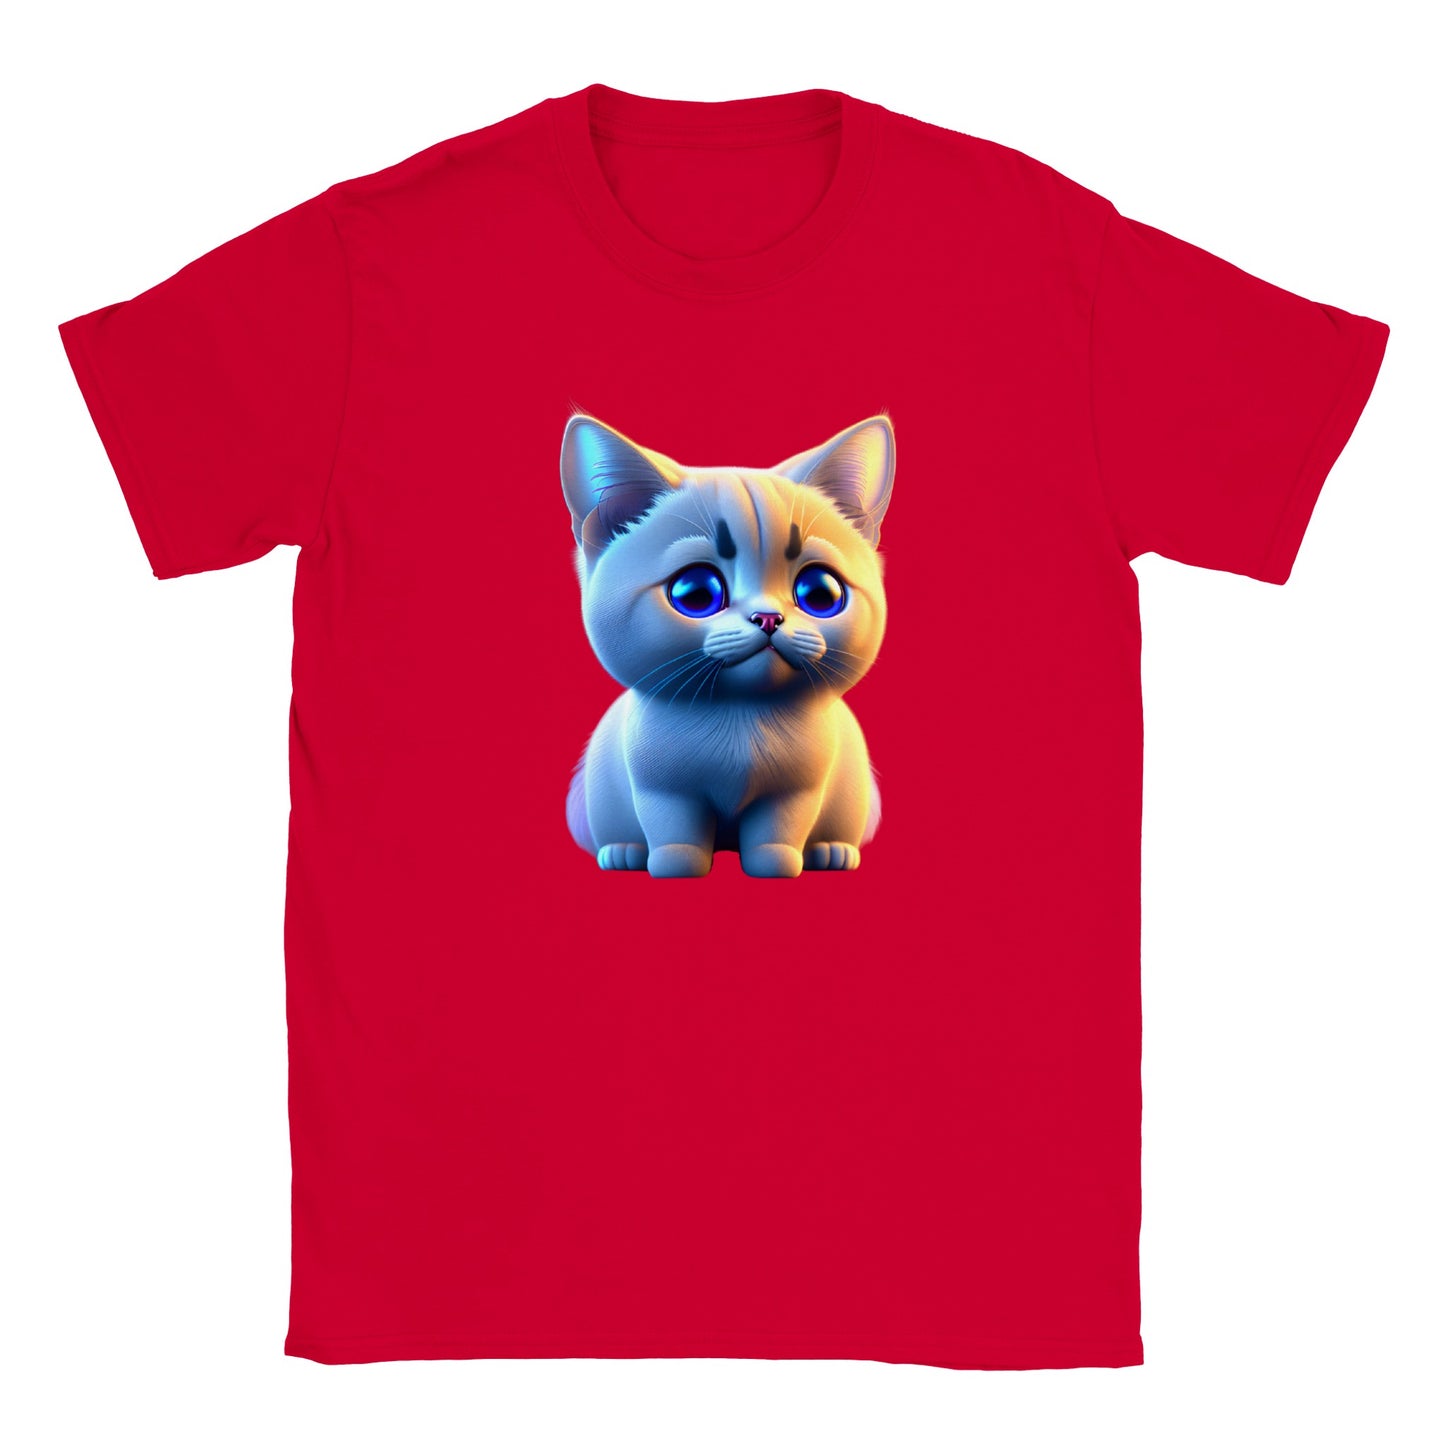 Adorable, Cool, Cute Cats and Kittens Toy - Classic Kids Crewneck T-Shirt 21